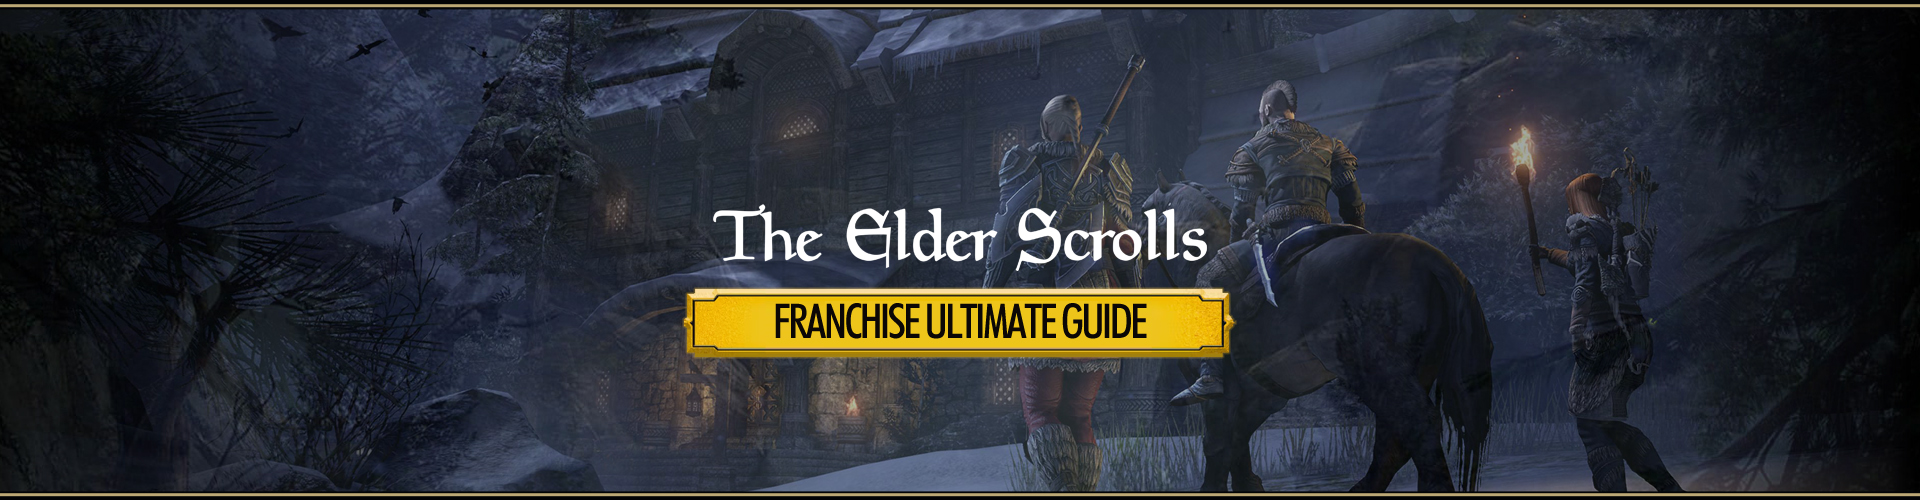 The Elder Scrolls Series: History of the Franchise